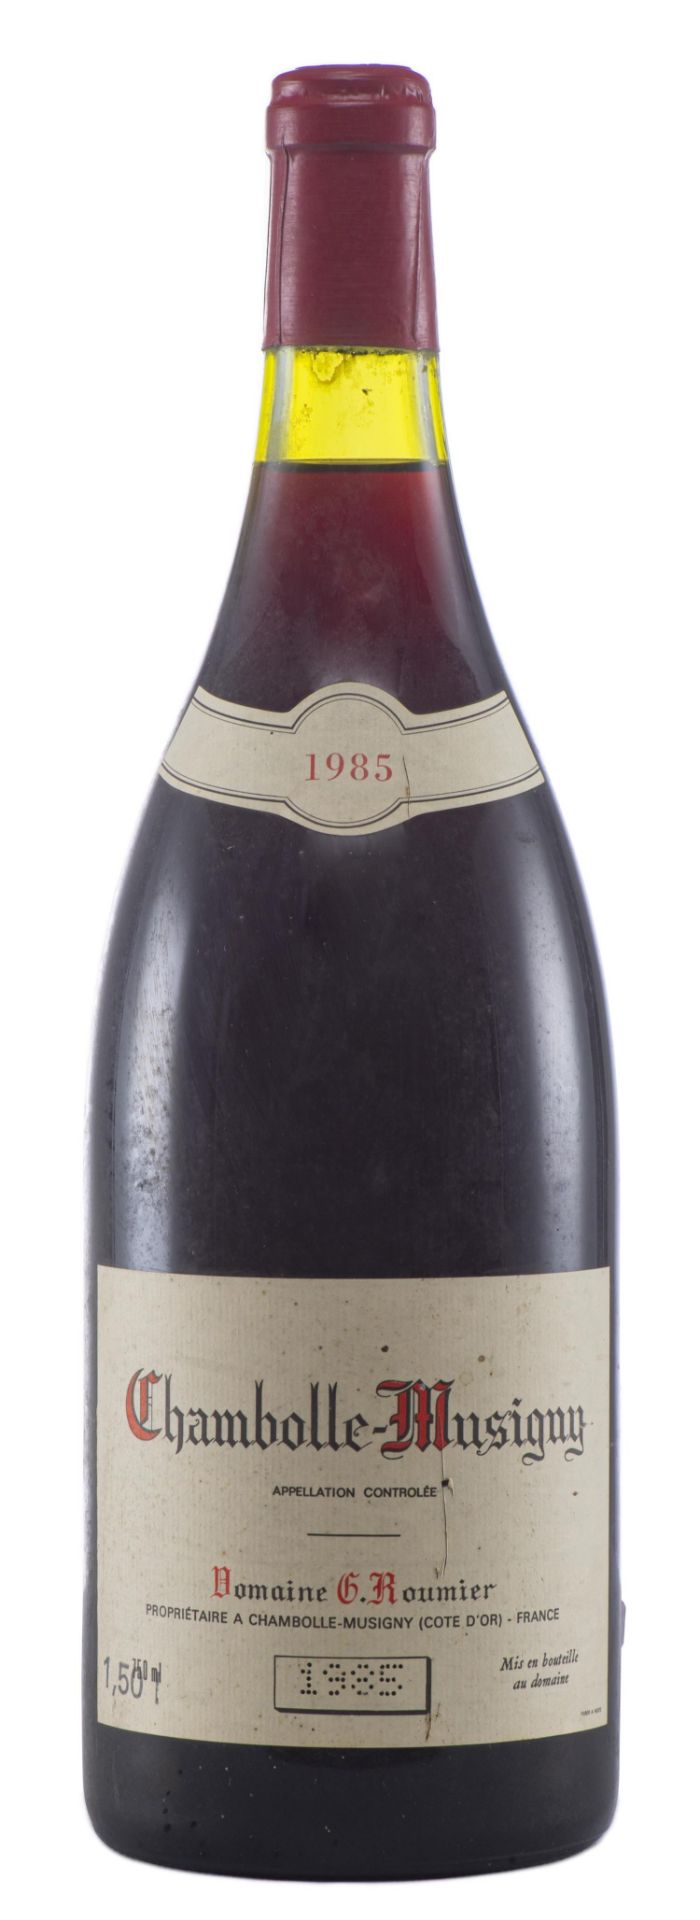 Chambolle Musigny, Domaine G. Roumier, 1985.